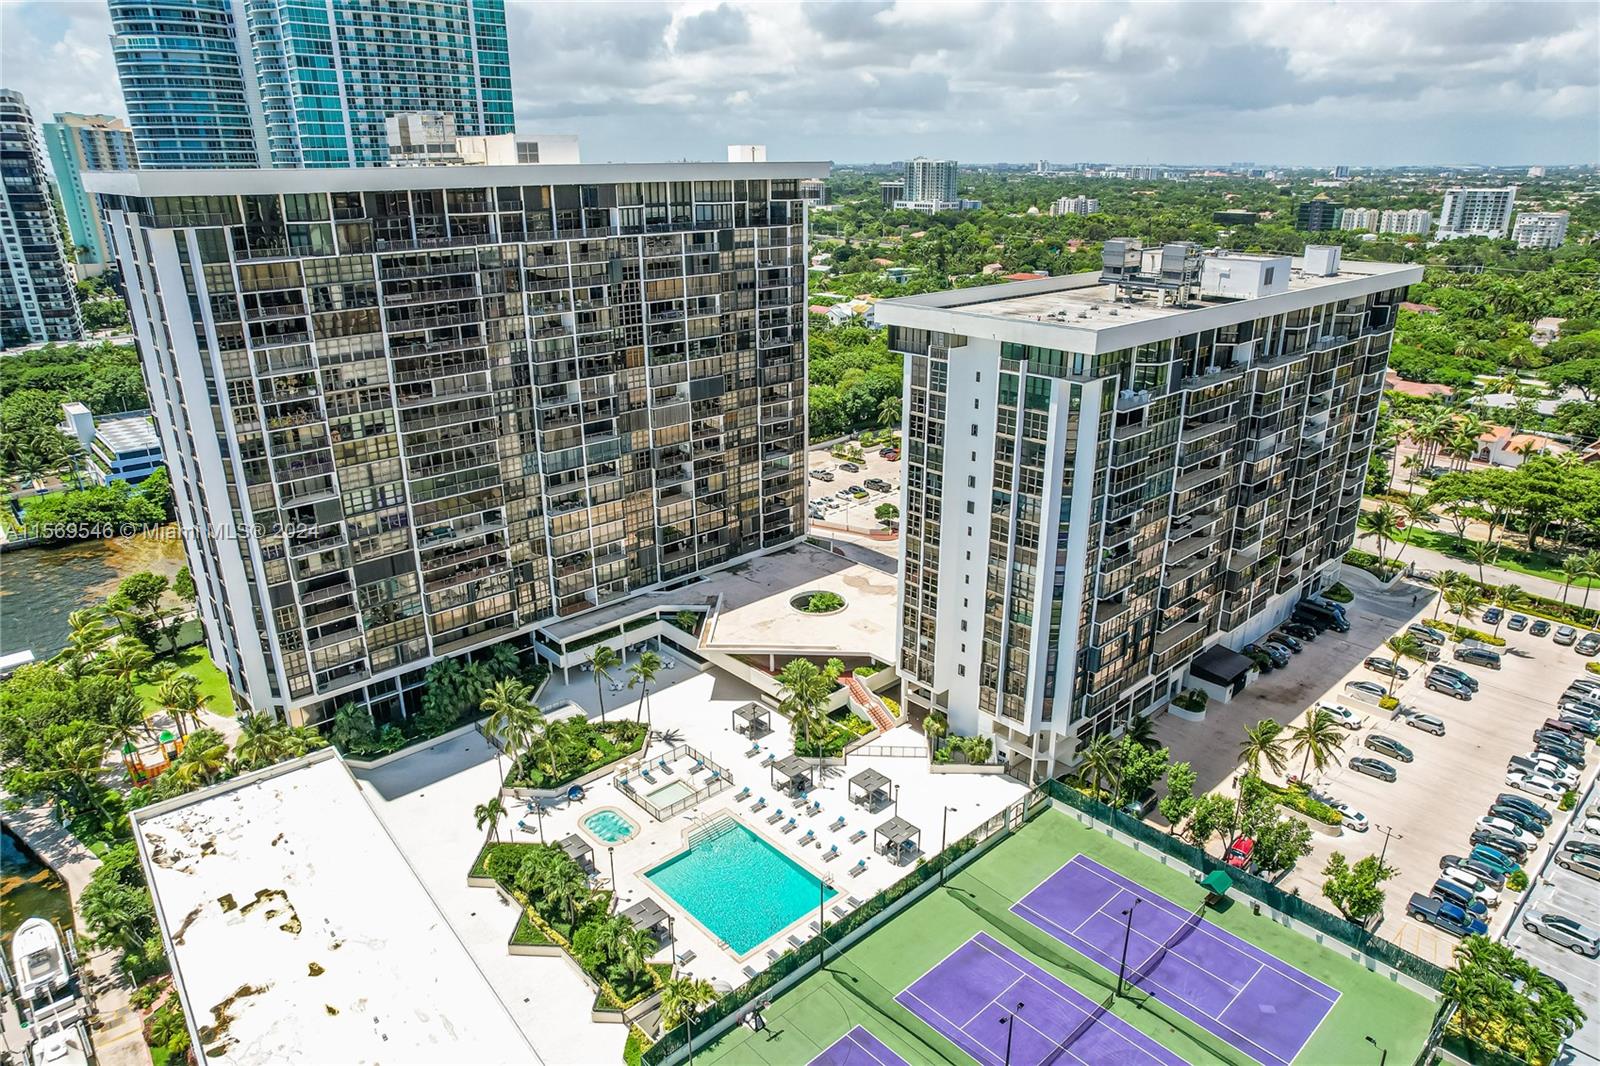 For Rent at the well established Brickell Place Phase II Condominium is this spacious 2 Bed/2Bath unit with open kitchen, stainless steel appliances and open balcony to enjoy amazing Sunset views. BPII Condominiun offers resort-like amenities  such as 6 tennis courts, pickleball court, sauna, Jacuzzi, bayside BBQ, children playground and playroom, exercise room among other perks. 
Conveniently located in the heart of Brickell Avenue is walking distance from Mary Brickell Village, Brickell City Center and just 15 minutes away from the Miami International Airport.